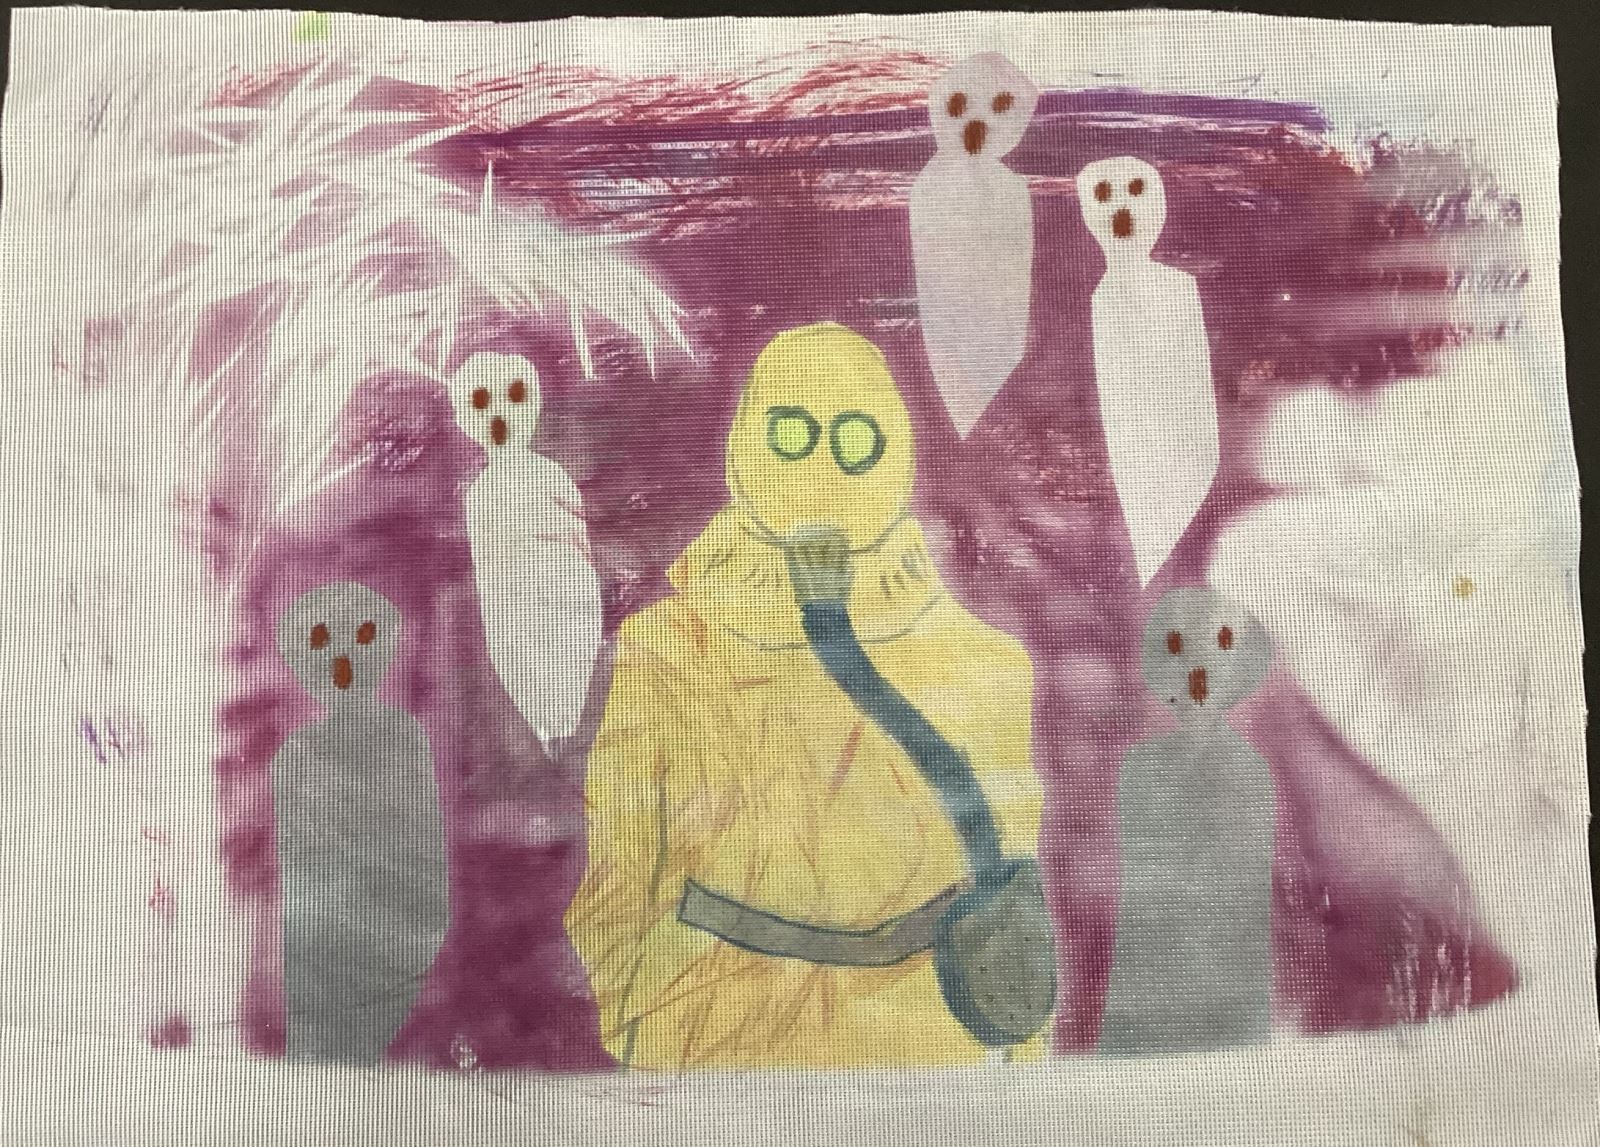 a person in a yellow biohazard suit surrounded by ghosts on a maroon background